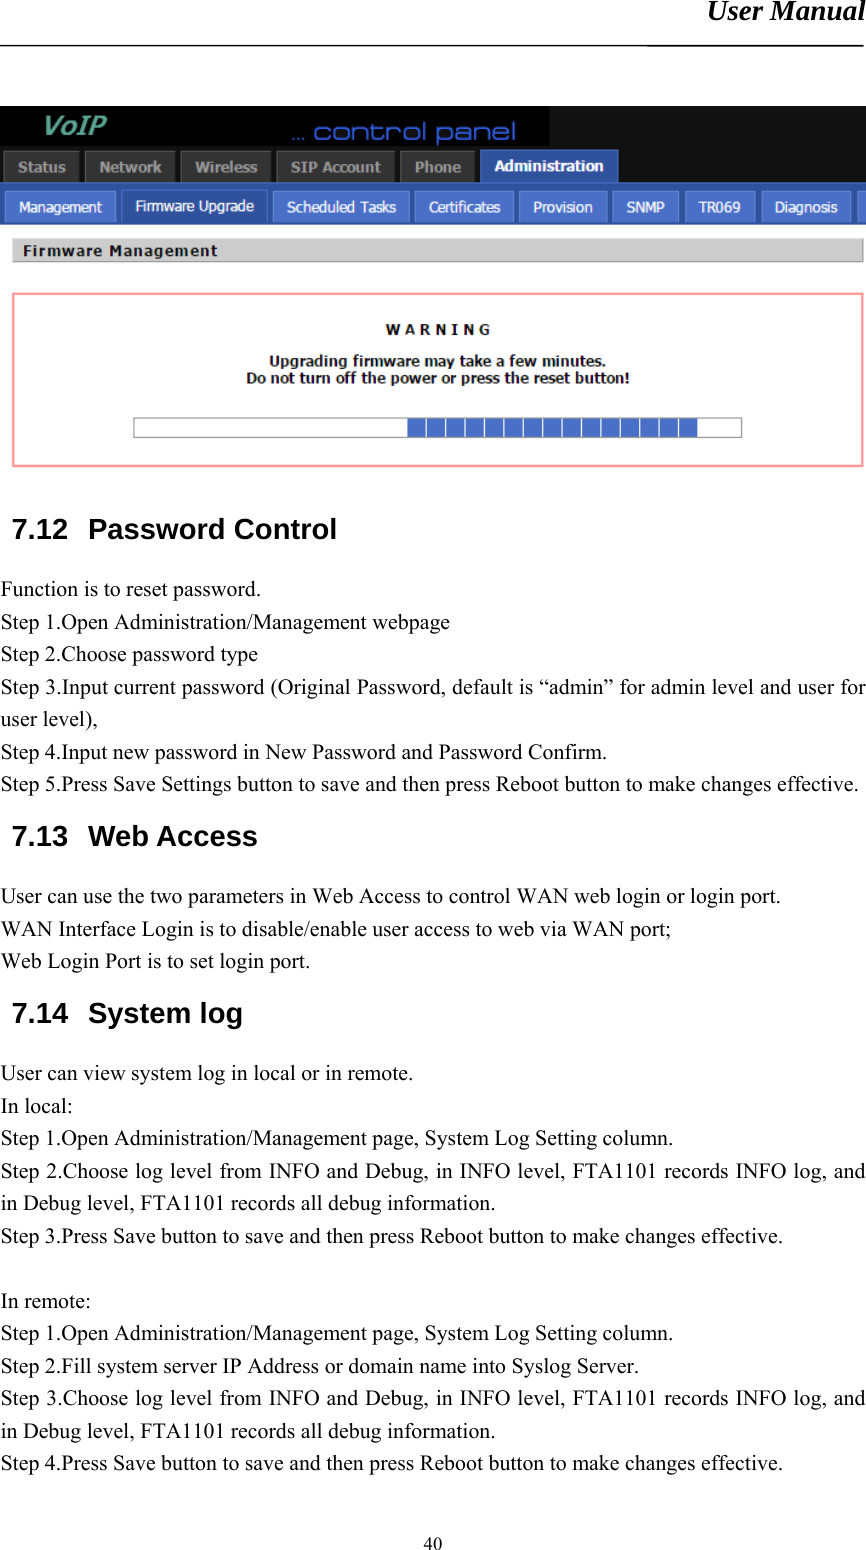 User Manual       40 7.12 Password Control Function is to reset password. Step 1.Open Administration/Management webpage Step 2.Choose password type Step 3.Input current password (Original Password, default is “admin” for admin level and user for user level),   Step 4.Input new password in New Password and Password Confirm. Step 5.Press Save Settings button to save and then press Reboot button to make changes effective. 7.13 Web Access User can use the two parameters in Web Access to control WAN web login or login port.   WAN Interface Login is to disable/enable user access to web via WAN port;   Web Login Port is to set login port. 7.14 System log User can view system log in local or in remote. In local: Step 1.Open Administration/Management page, System Log Setting column. Step 2.Choose log level from INFO and Debug, in INFO level, FTA1101 records INFO log, and in Debug level, FTA1101 records all debug information. Step 3.Press Save button to save and then press Reboot button to make changes effective.  In remote: Step 1.Open Administration/Management page, System Log Setting column. Step 2.Fill system server IP Address or domain name into Syslog Server. Step 3.Choose log level from INFO and Debug, in INFO level, FTA1101 records INFO log, and in Debug level, FTA1101 records all debug information. Step 4.Press Save button to save and then press Reboot button to make changes effective. 